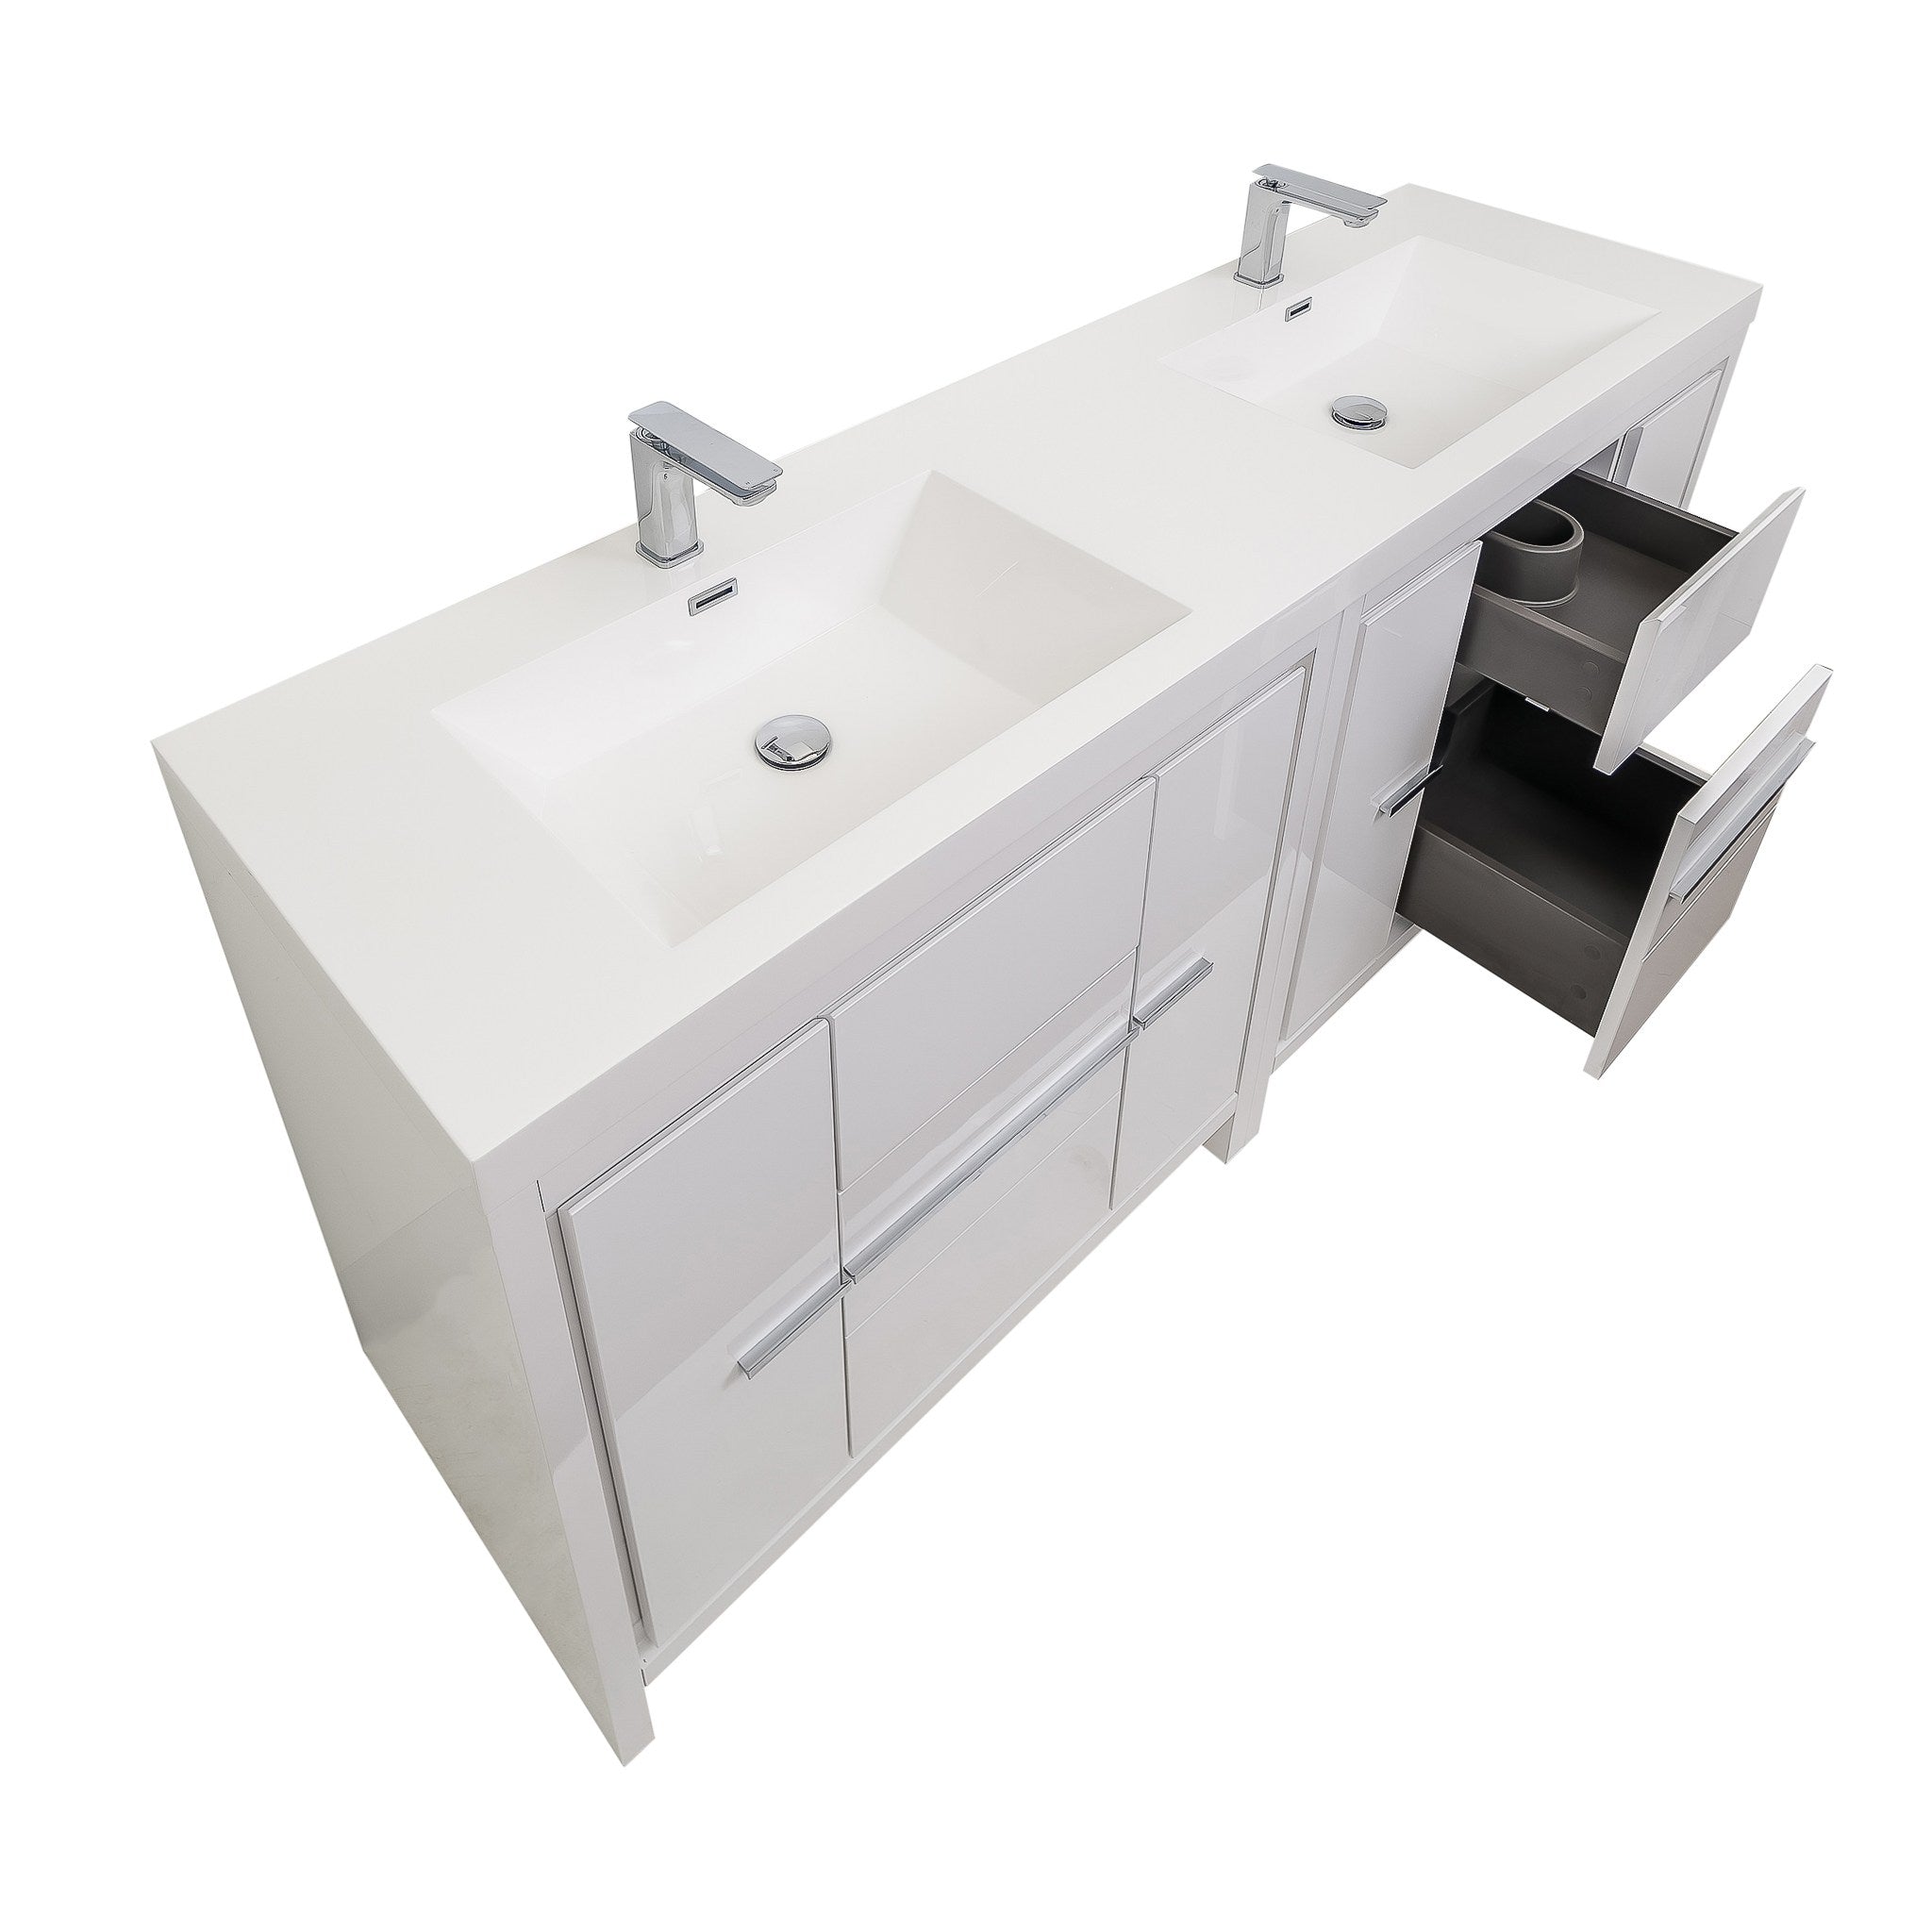 Granada 71 White High Gloss With Chrome Handle Cabinet, Square Cultured Marble Double Sink, Free Standing Modern Vanity Set